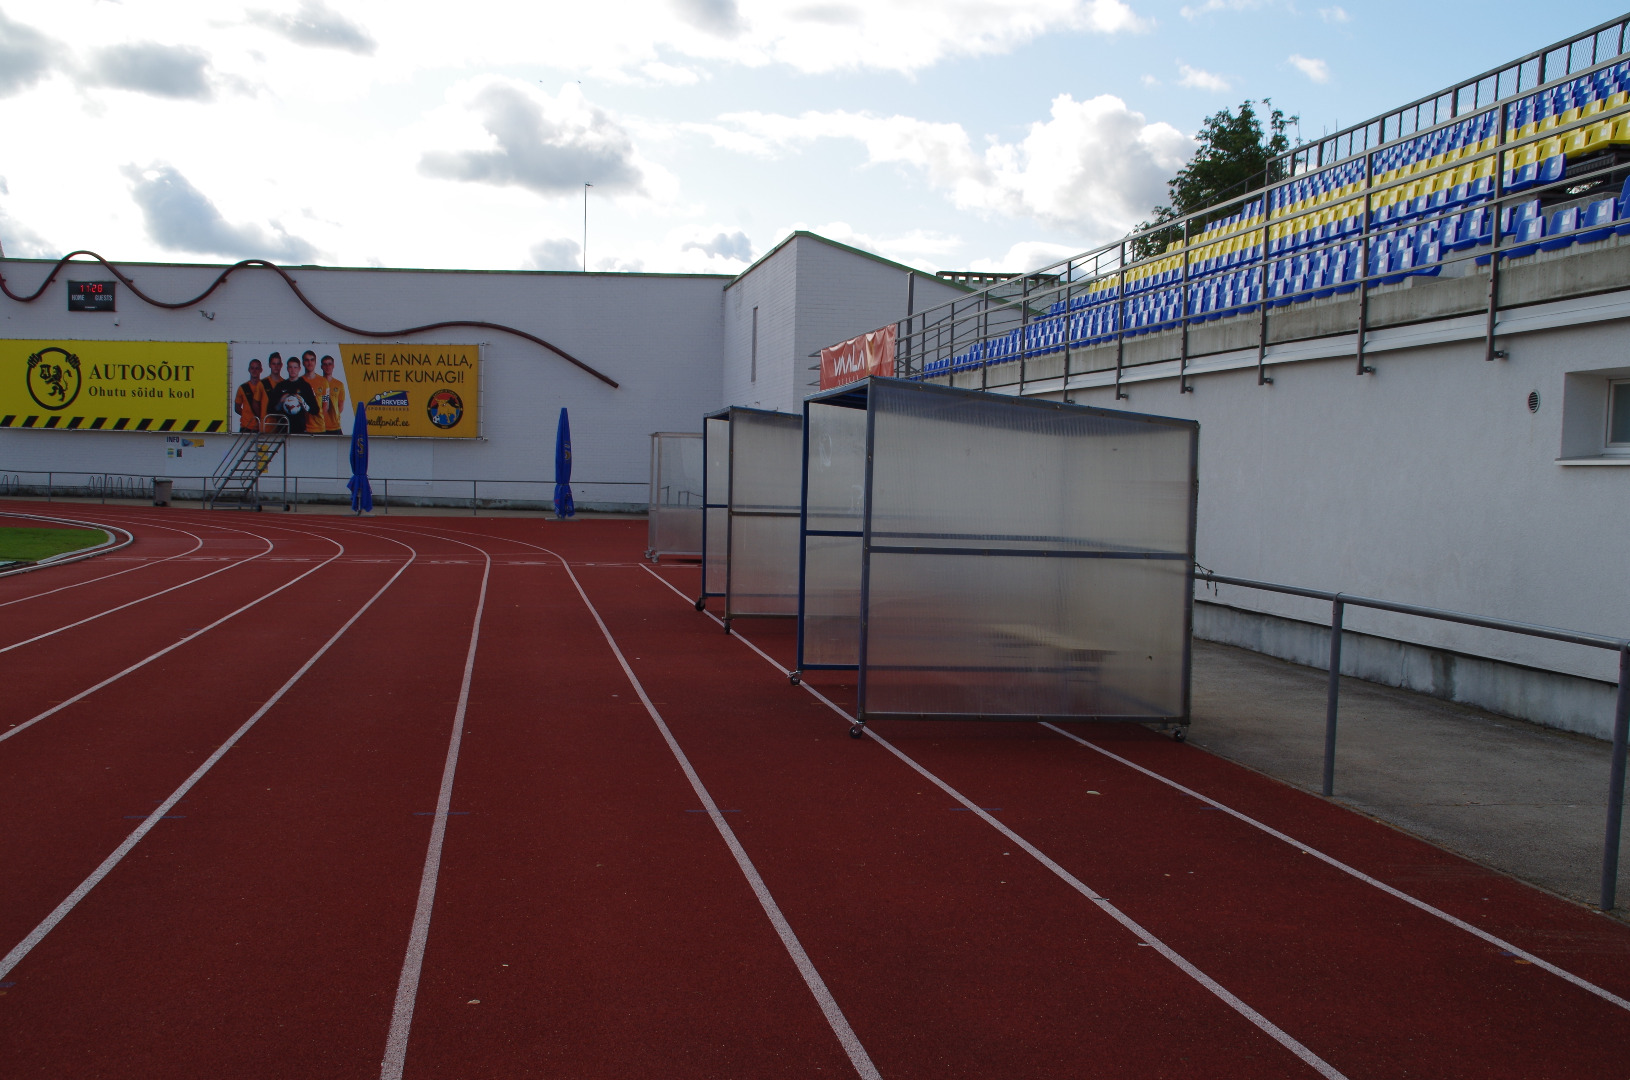 Placing a new cover on the Rakvere Stadium. rephoto